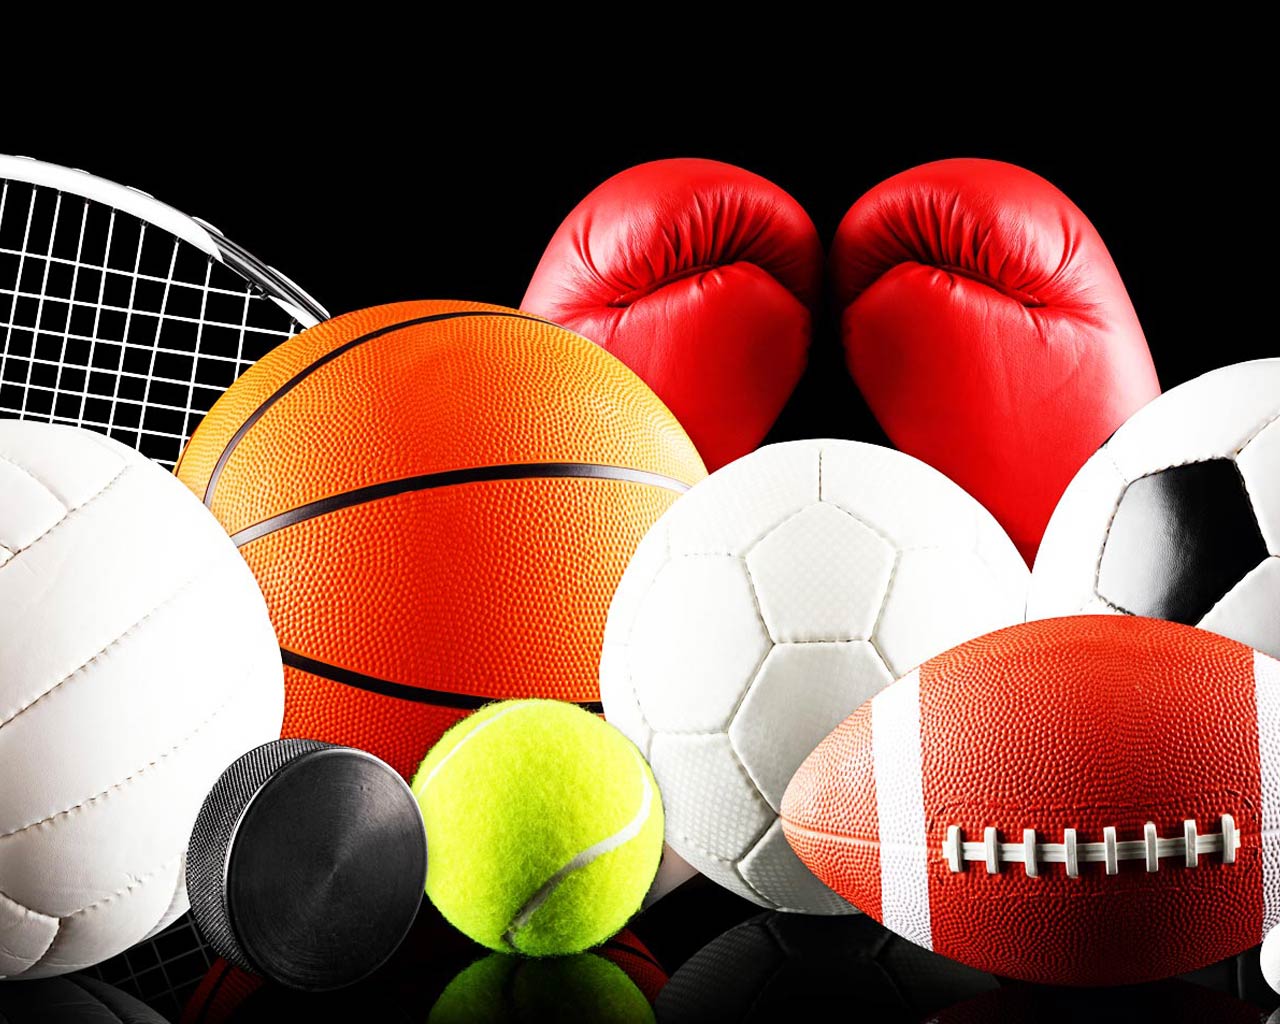 Sports Accessories Market is touching new levels – Intense Competition from Key Players – Nike, Adidas AG, Reebok International Ltd, Puma SE 2